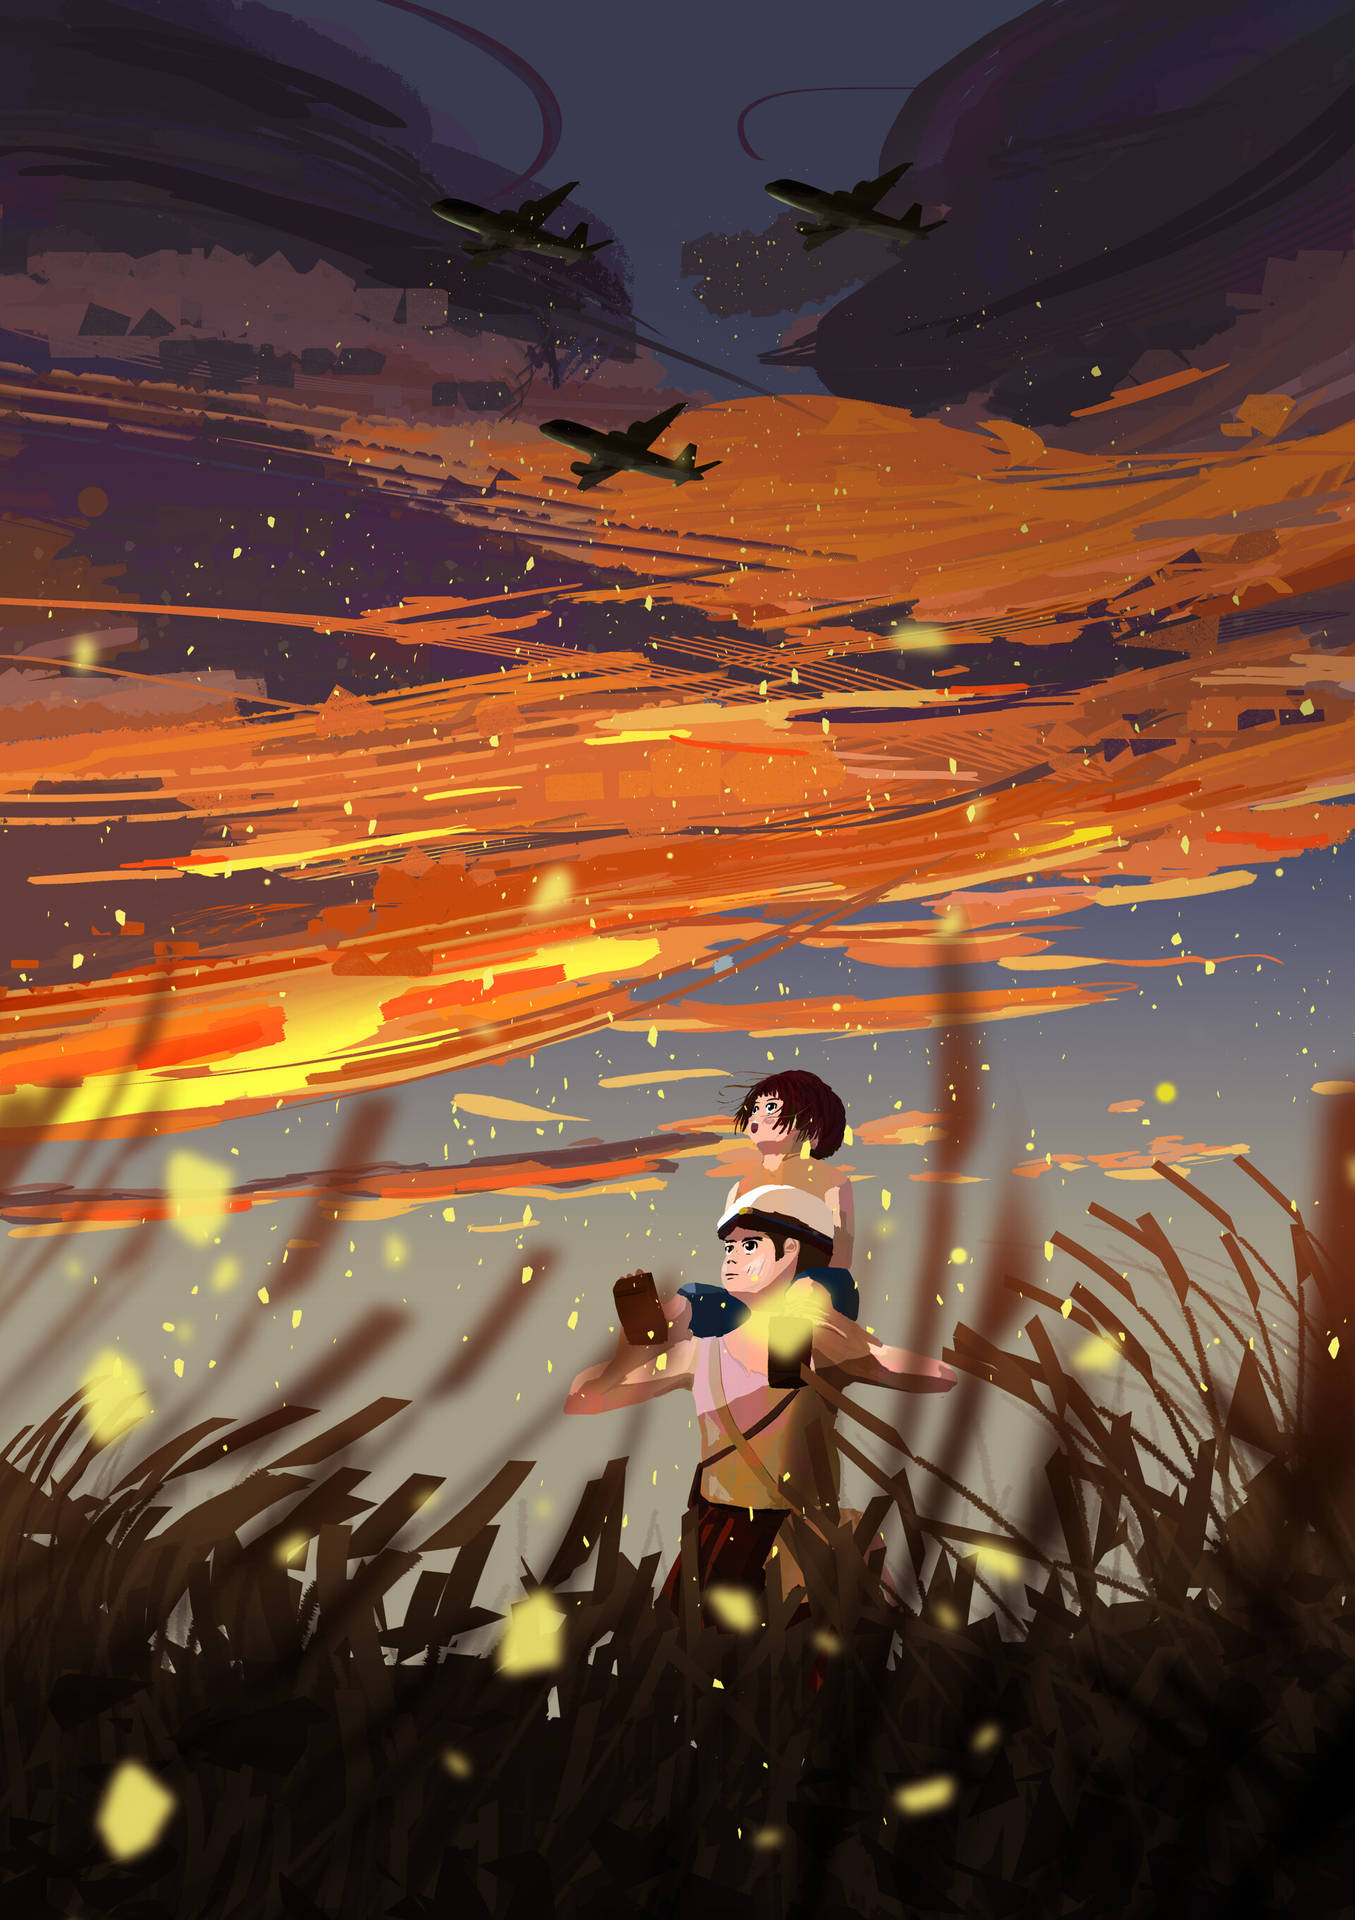 Free Grave Of The Fireflies Wallpaper Downloads, [100+] Grave Of The Fireflies  Wallpapers for FREE 